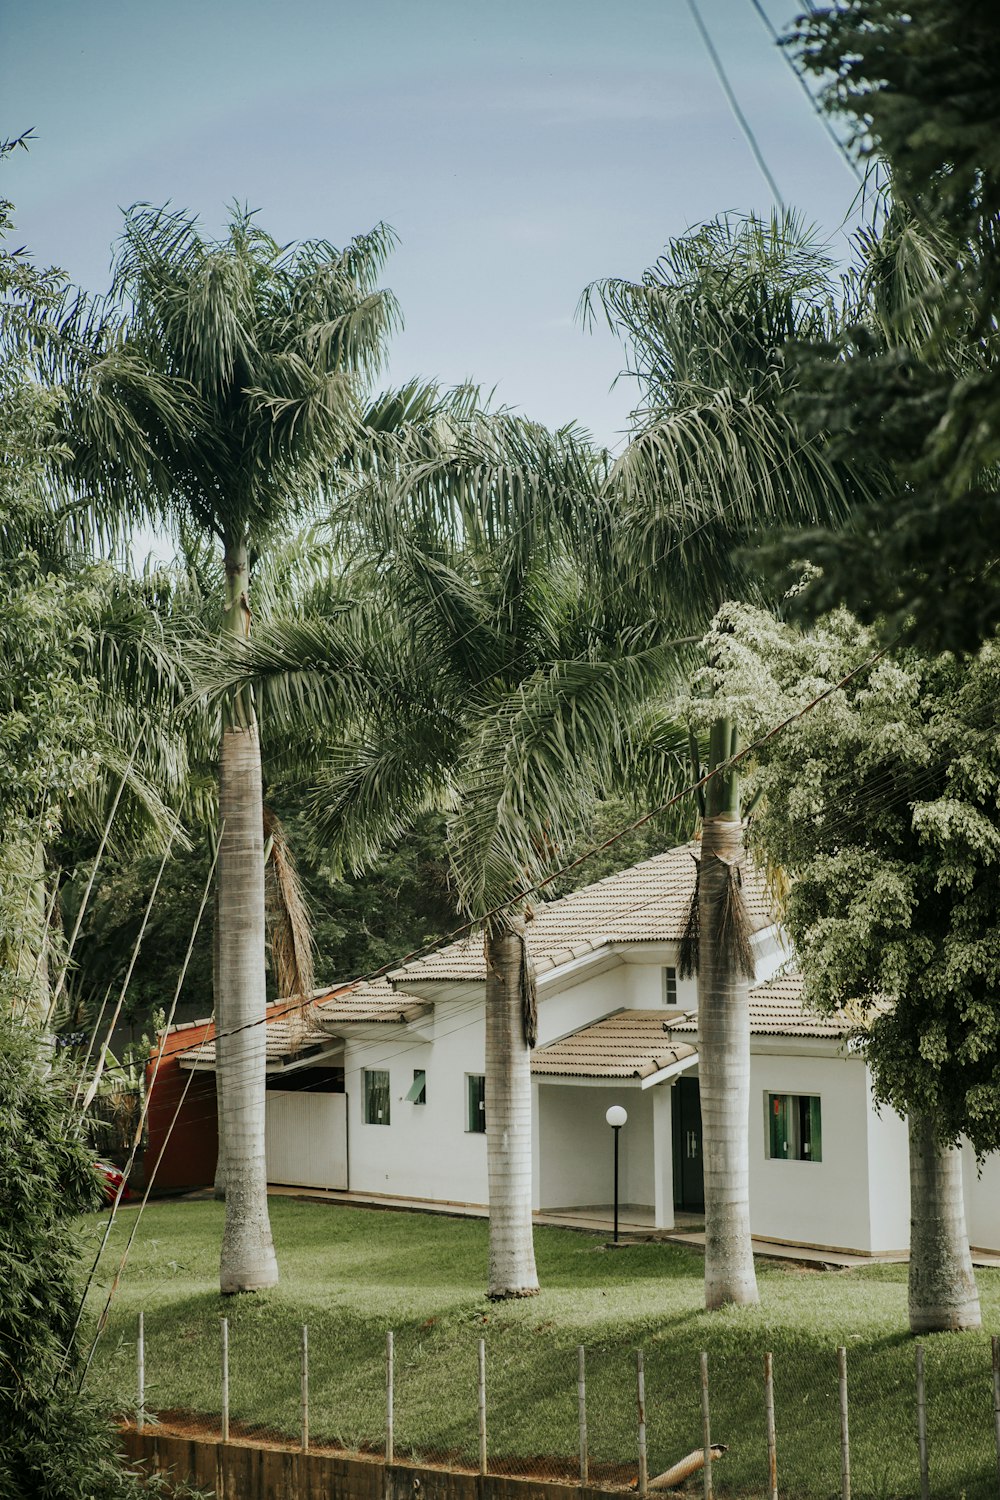 white concrete house near palm trees during daytime